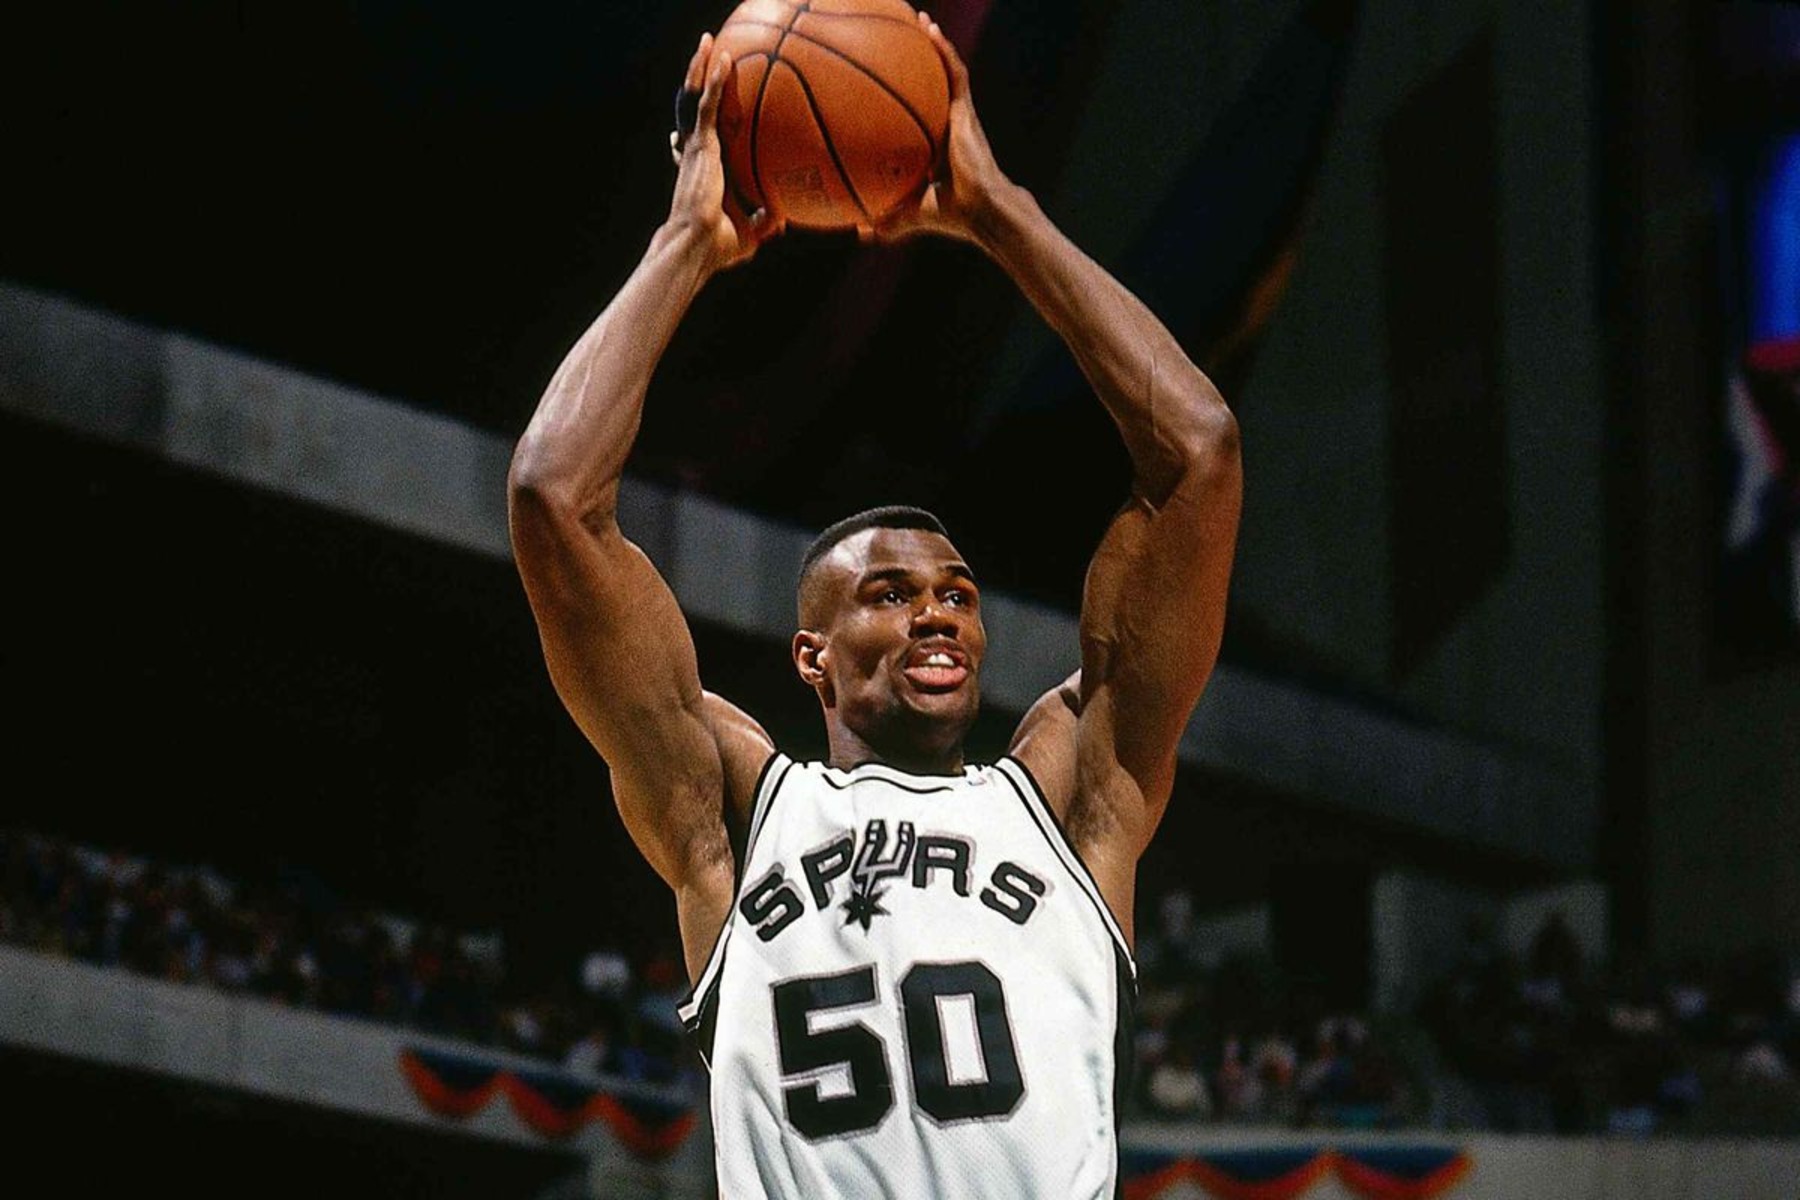 21 Extraordinary Facts About David Robinson - Facts.net